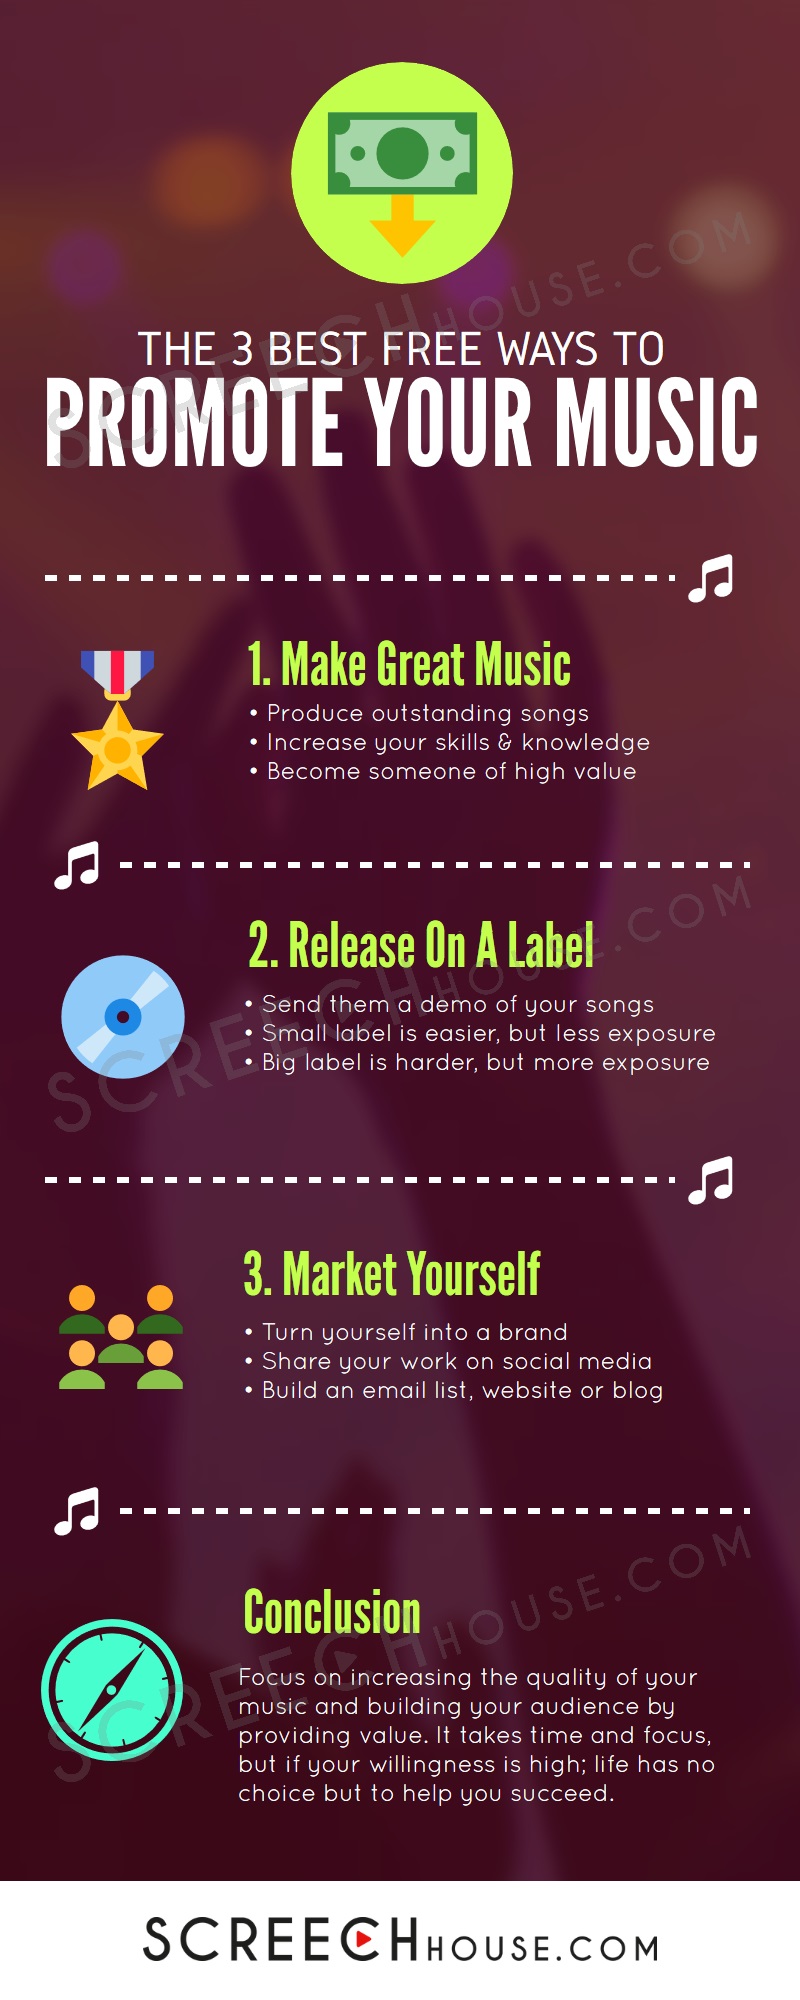 The 3 Best Free Ways to Promote Your Music - Infographic